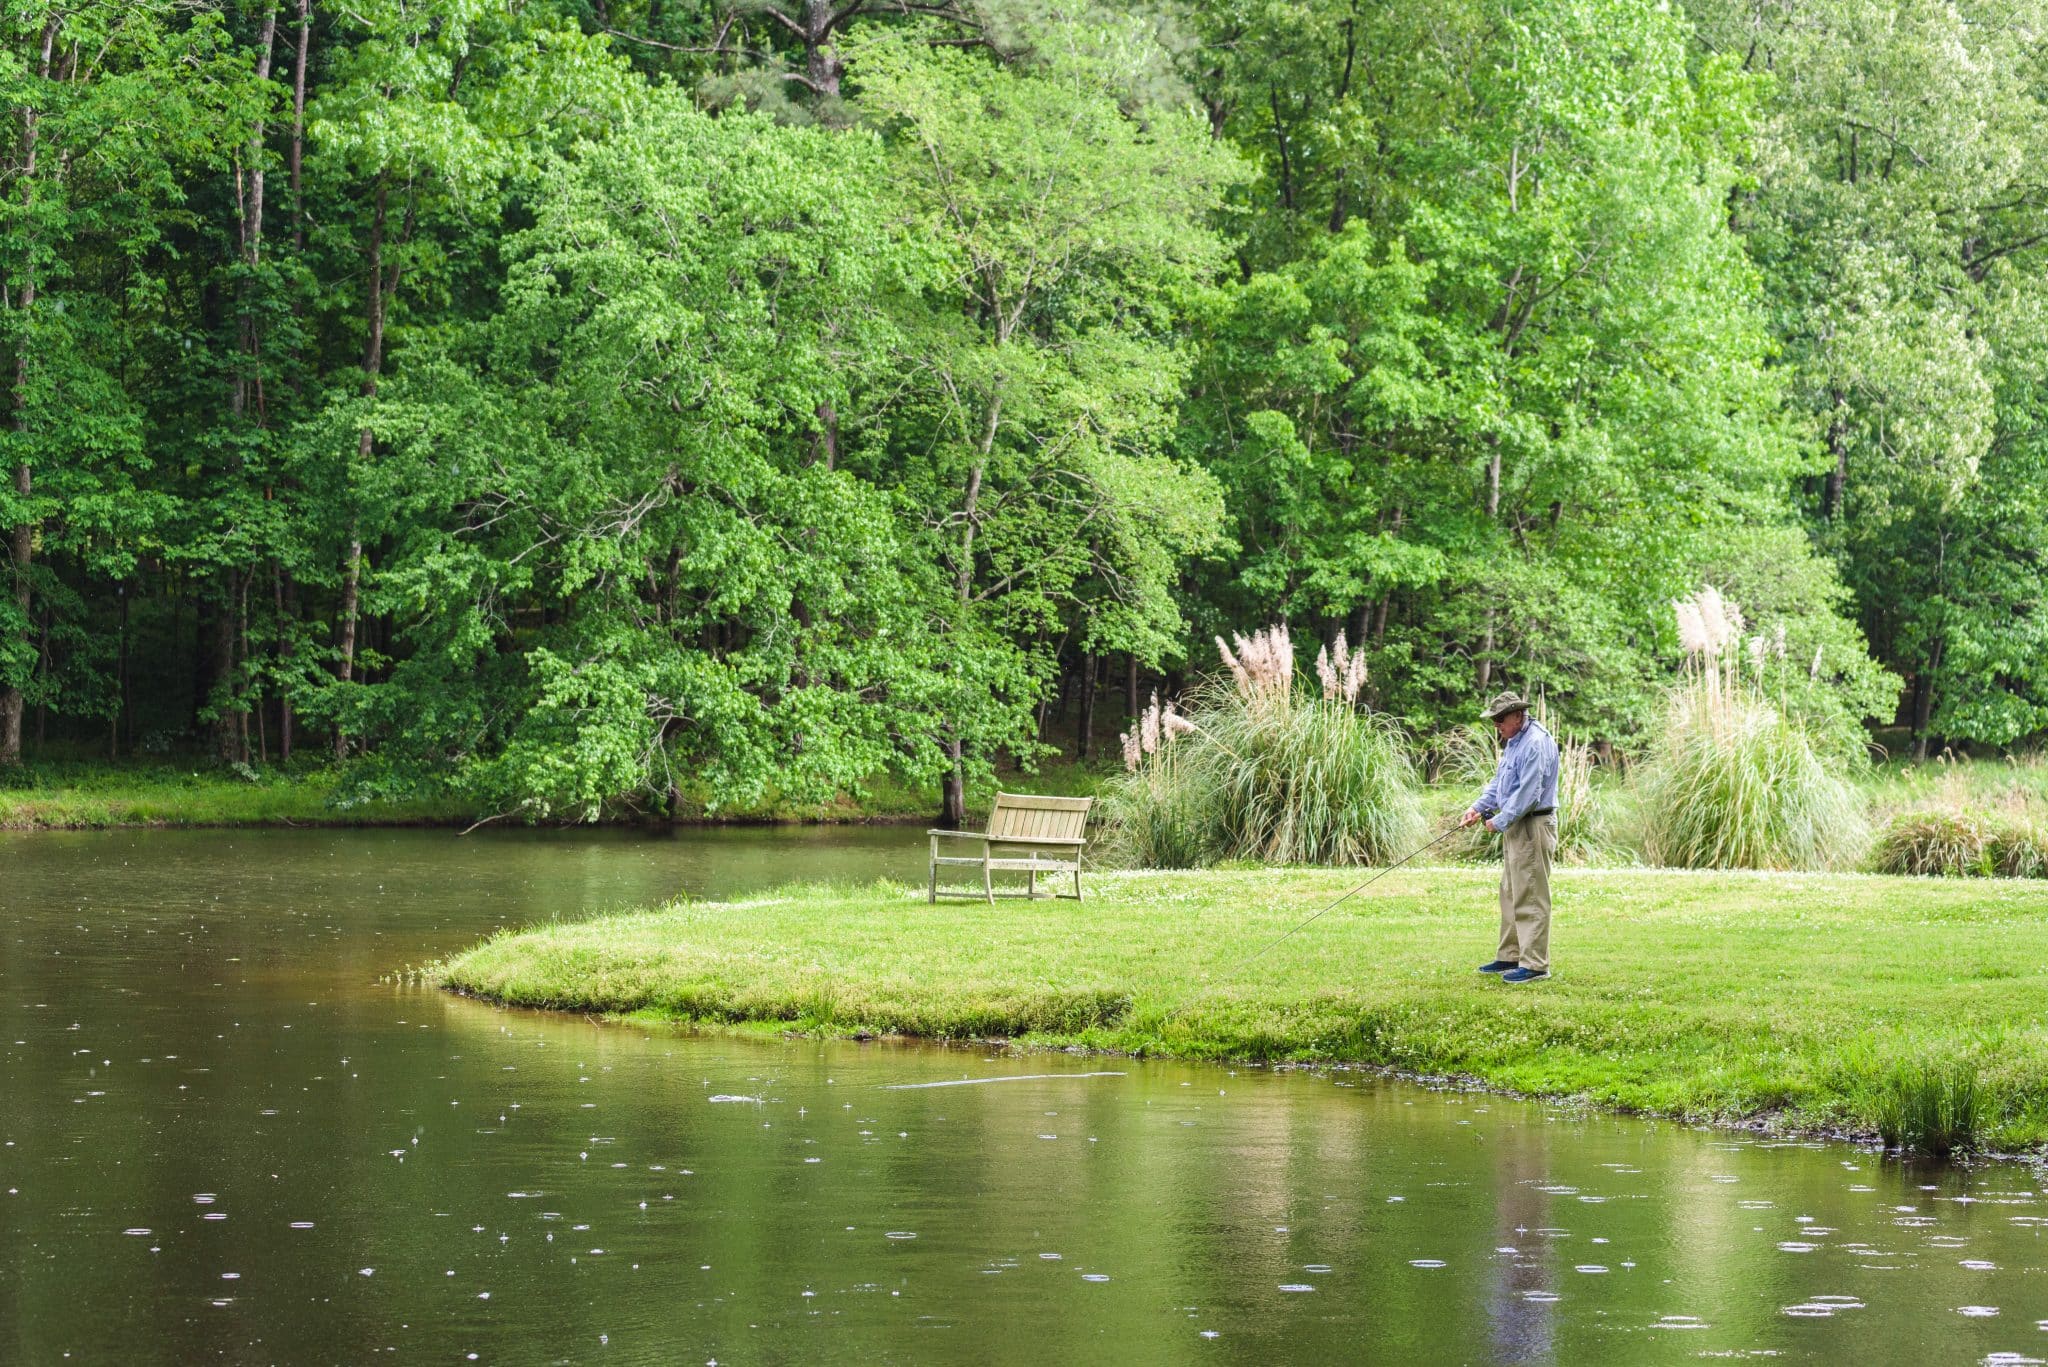 A resident fishes in one of Shoal Creek’s six lakes, a feature that makes it one of the best neighborhoods in Birmingham